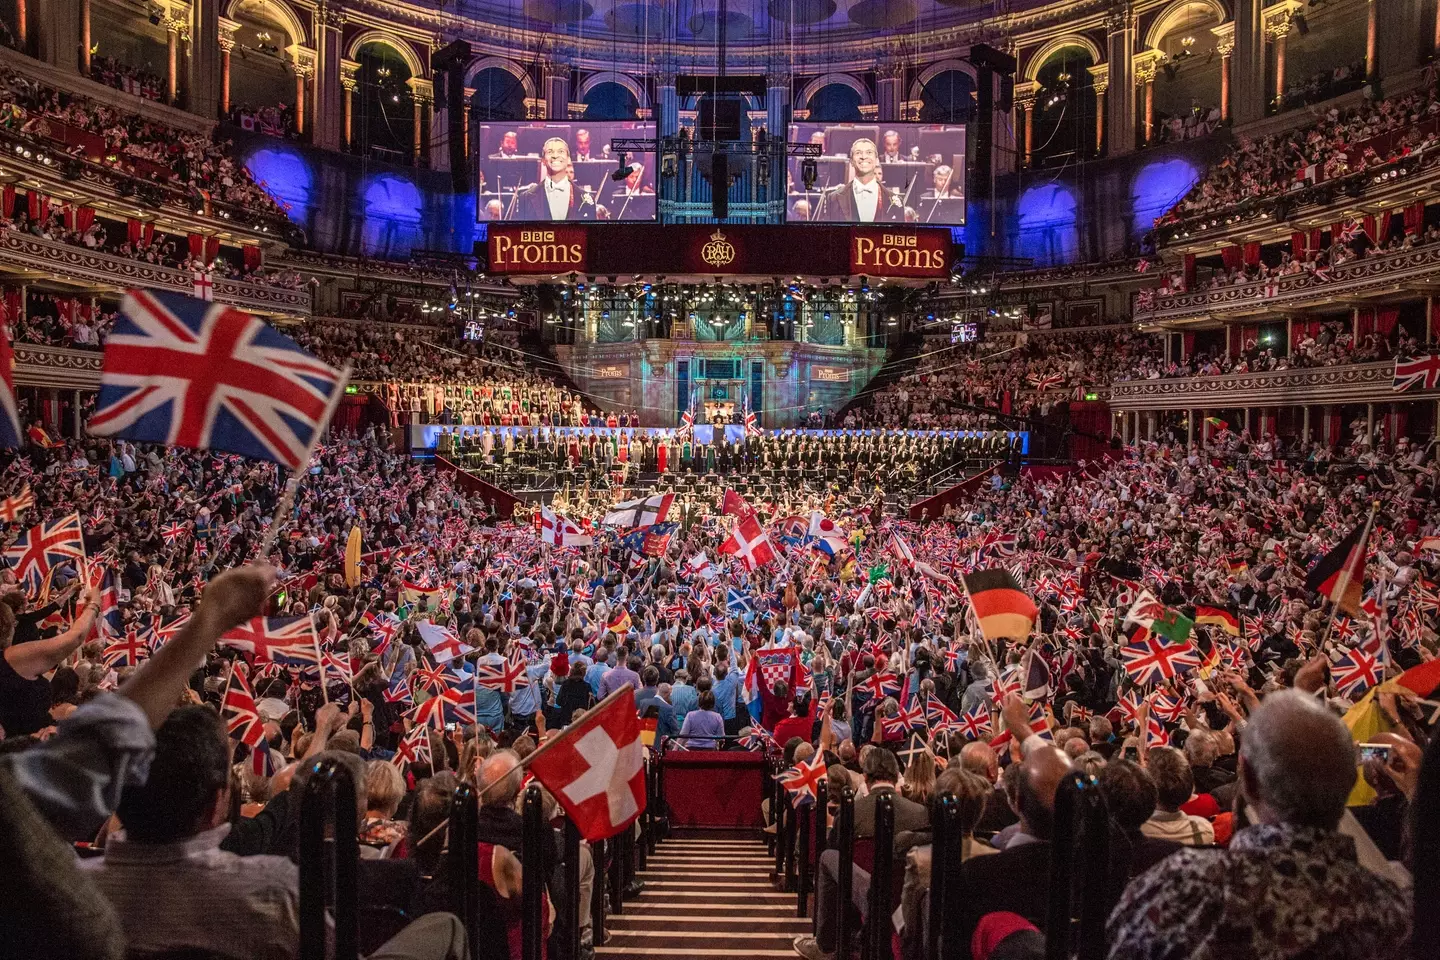 Two nights of The Proms have been cancelled.